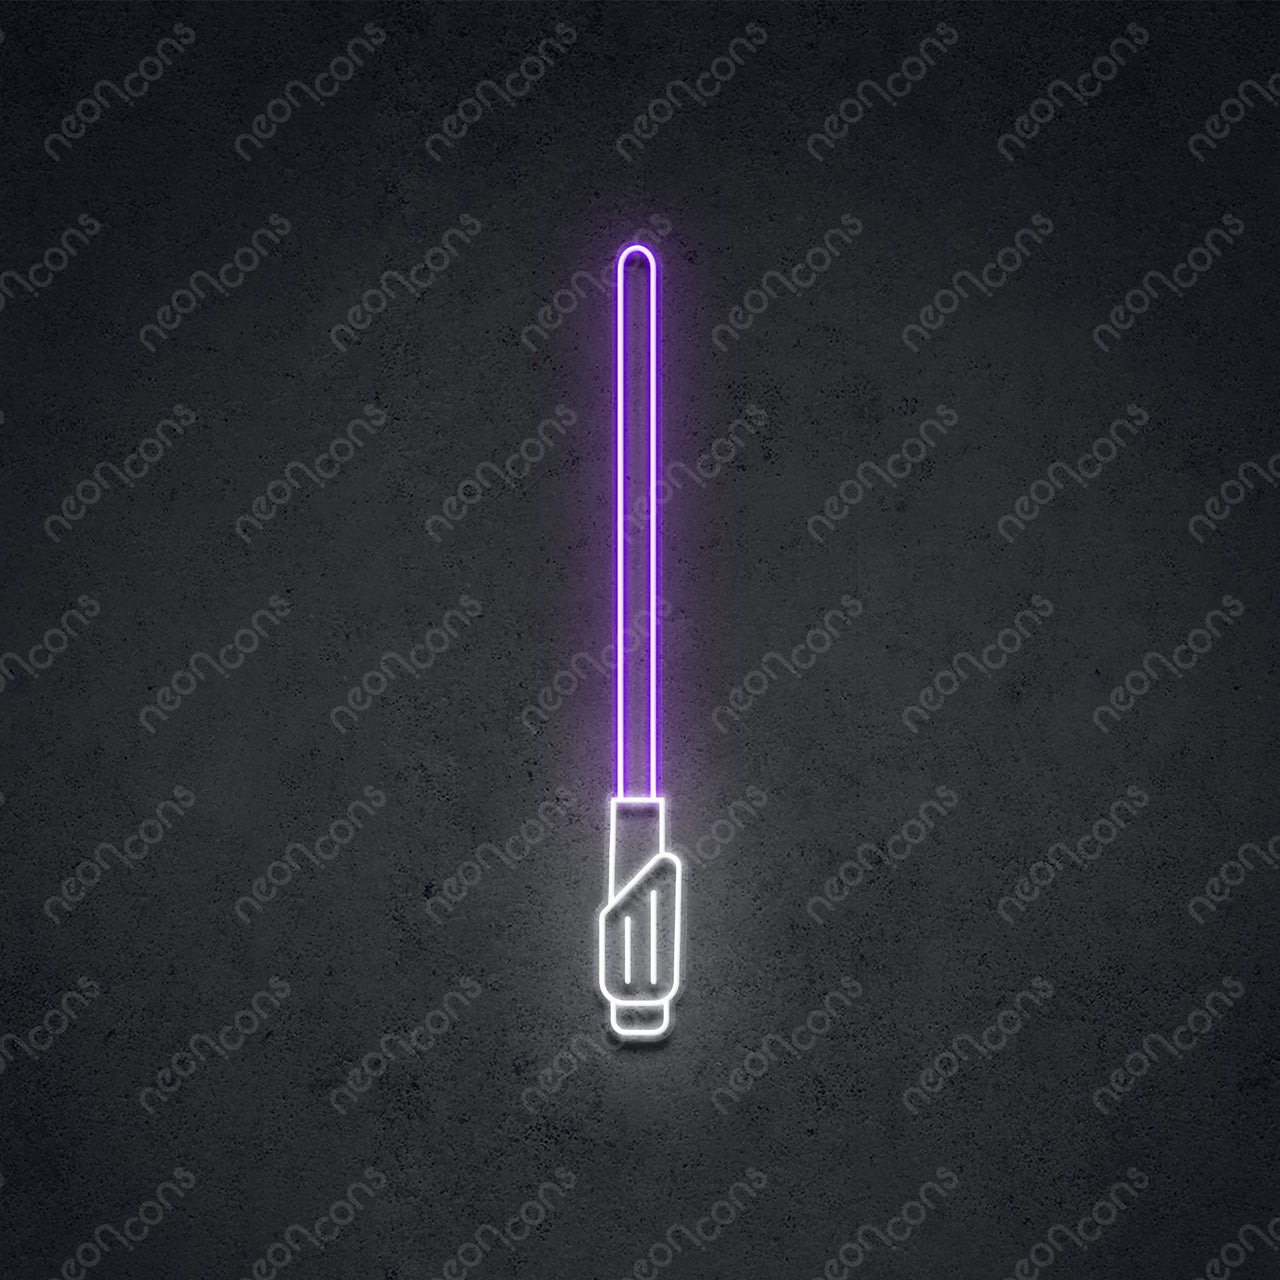 "Space Sword" Neon Sign 60cm (2ft) / Purple / LED Neon by Neon Icons